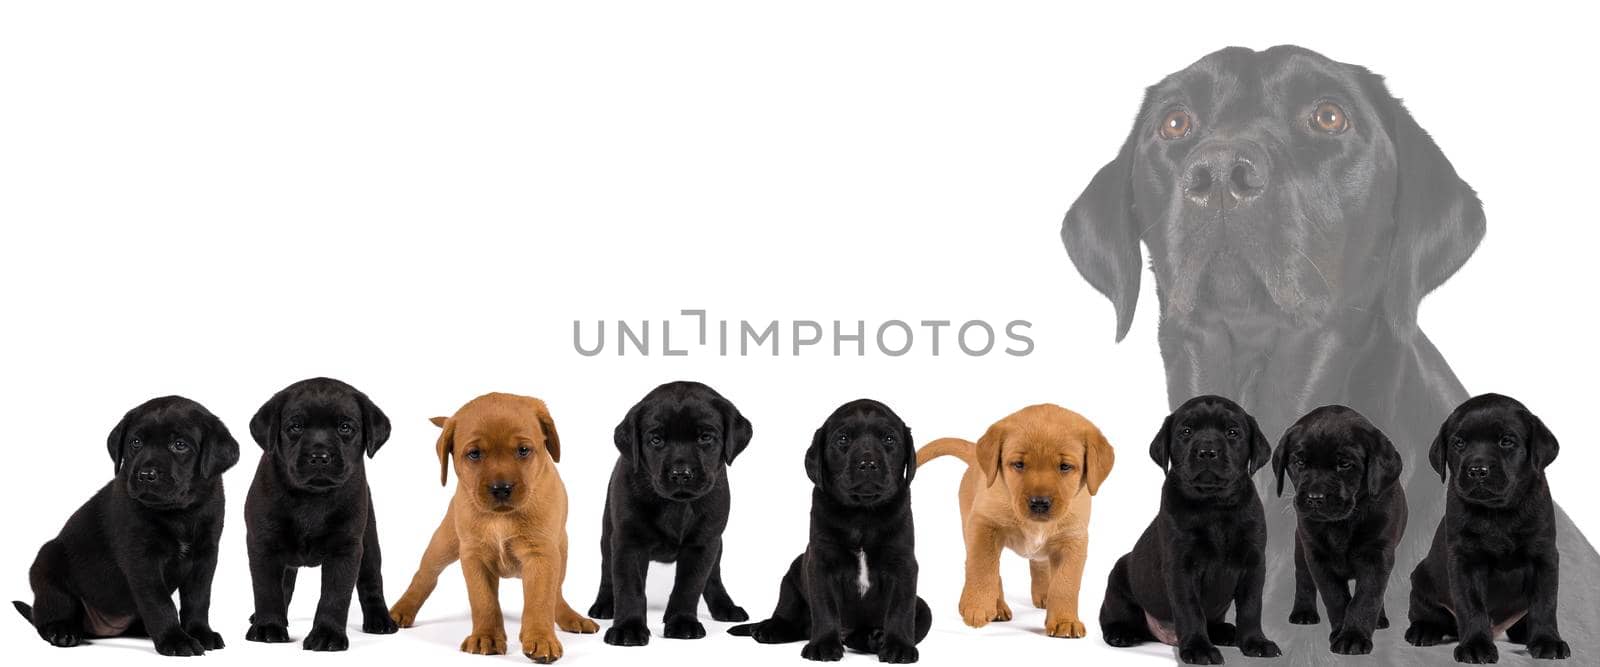 Banner with black and blonde labrador retriever puppy's  isolated on white background by LeoniekvanderVliet